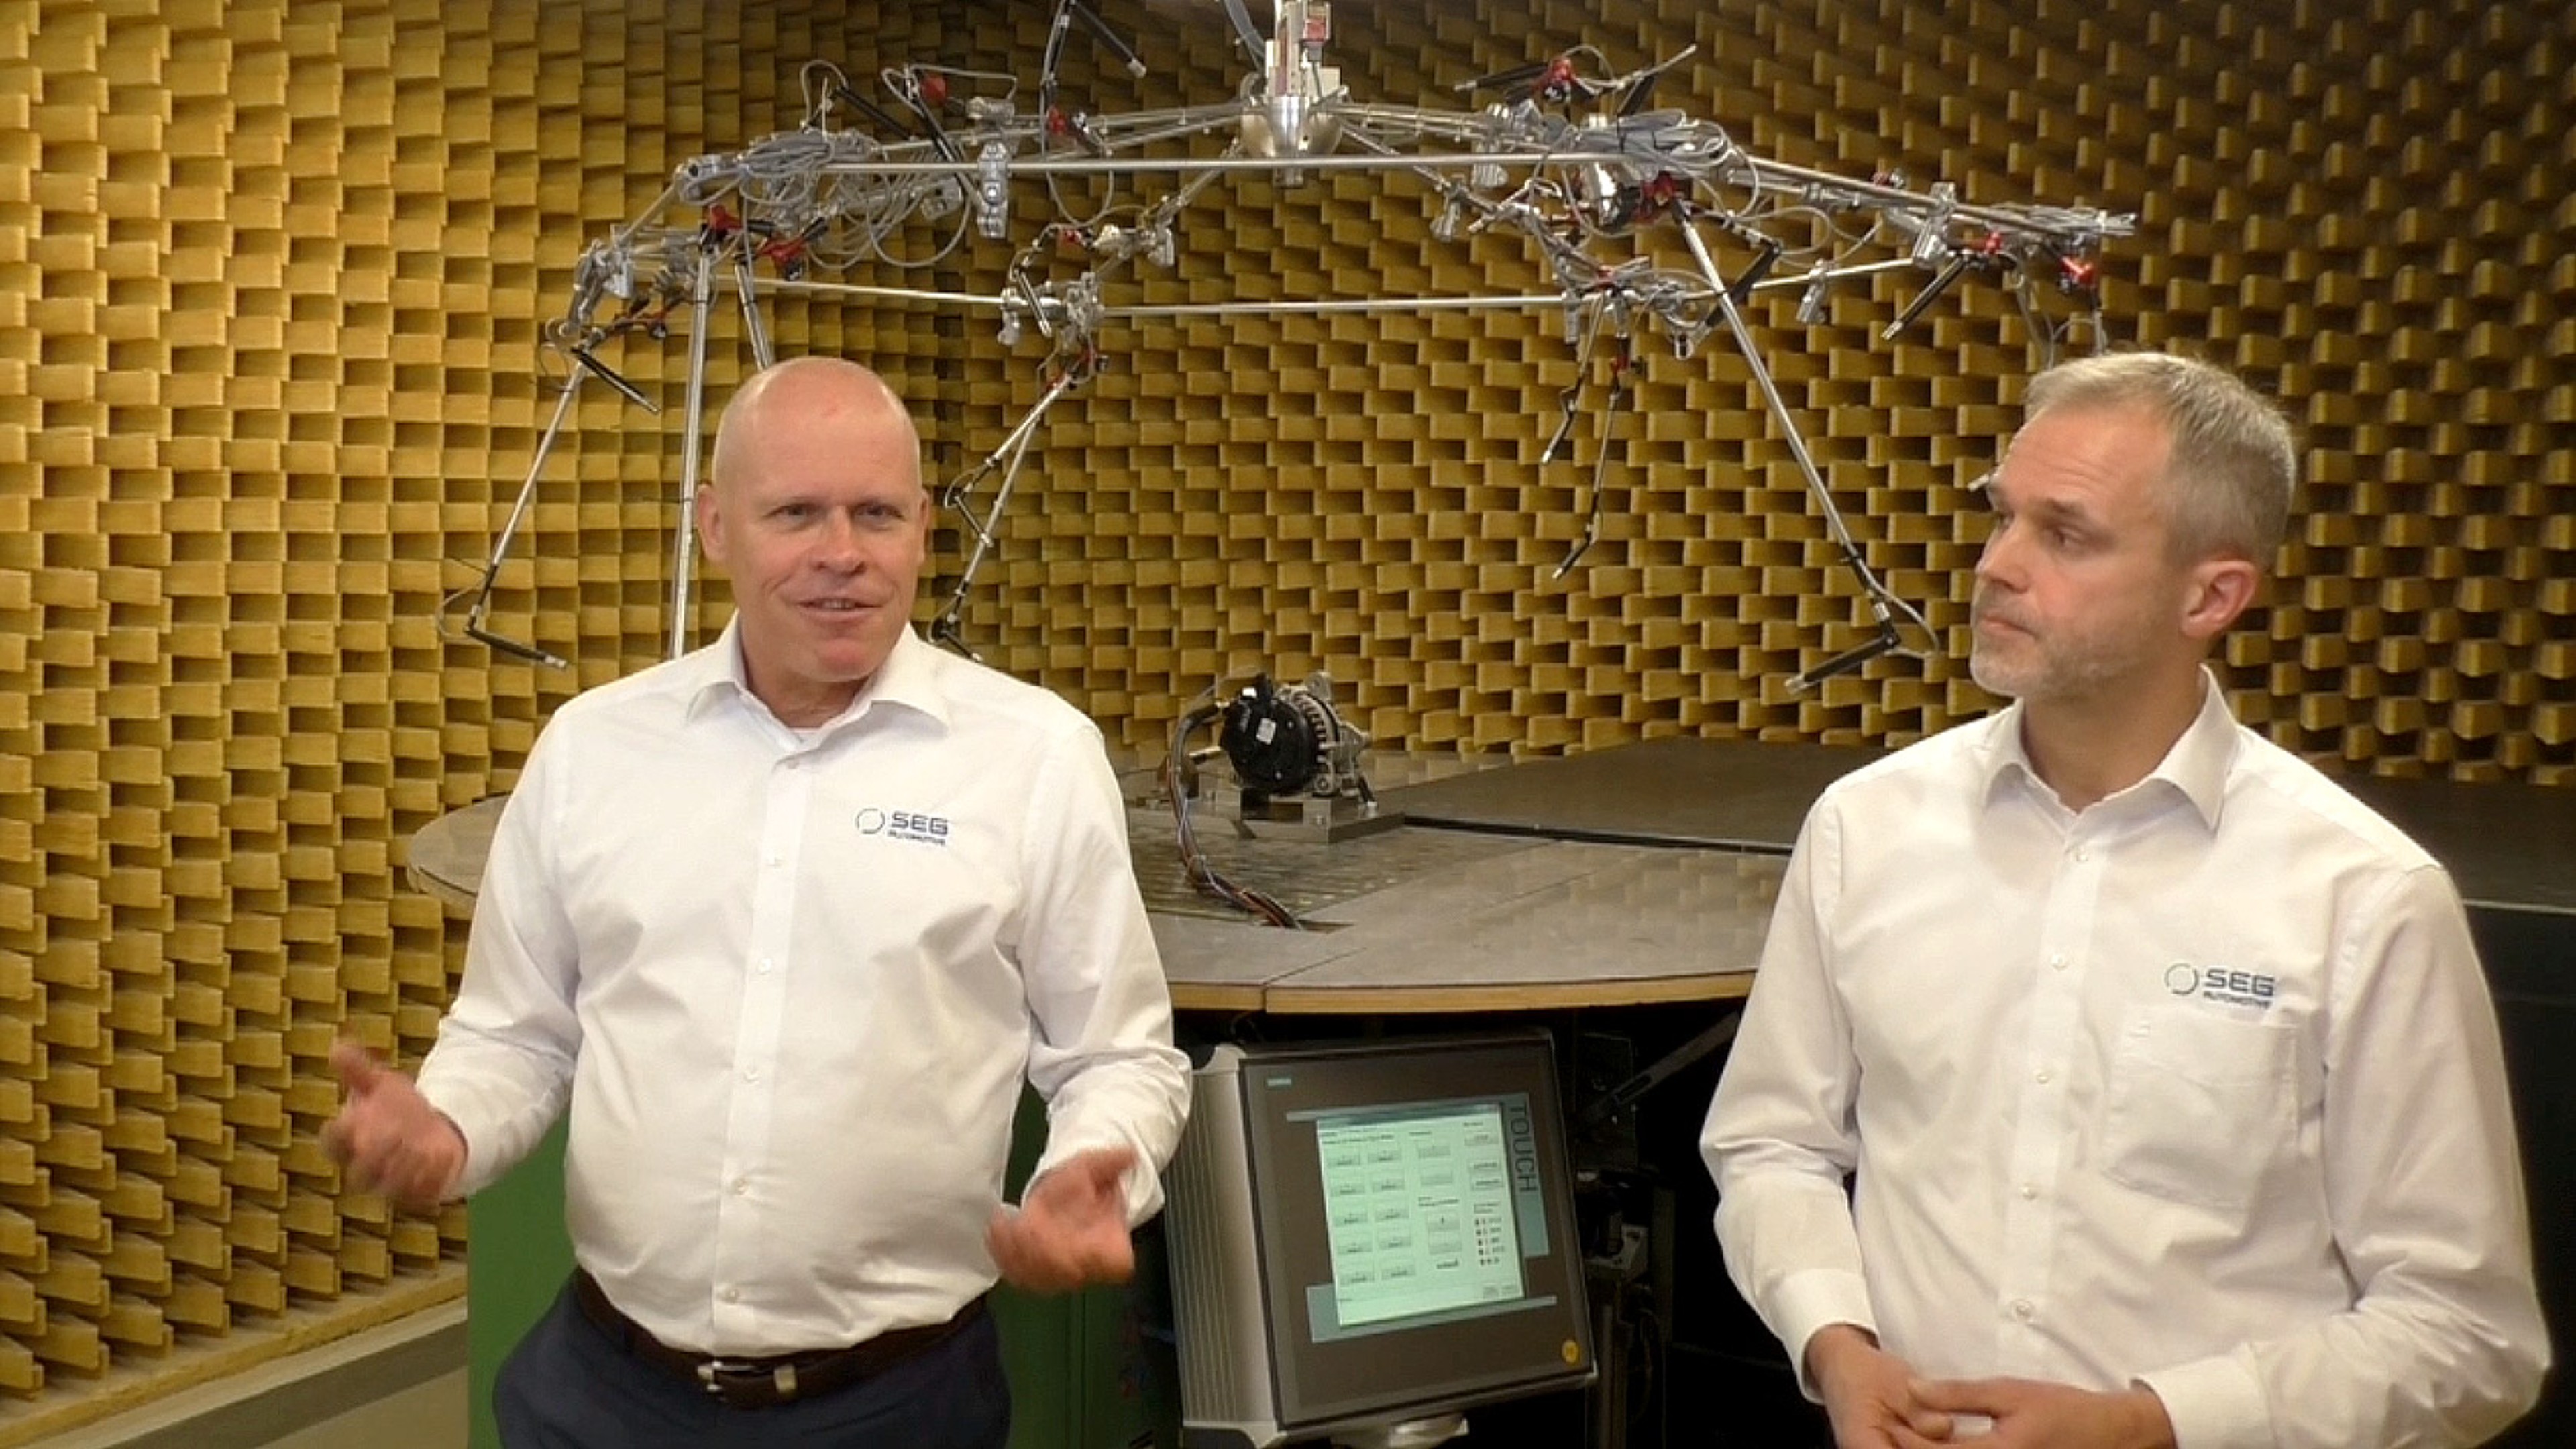 Dr. Peter Sokol, and Nikolaus Pröbsting, SEG Automotive, in a noise/sound laboratory